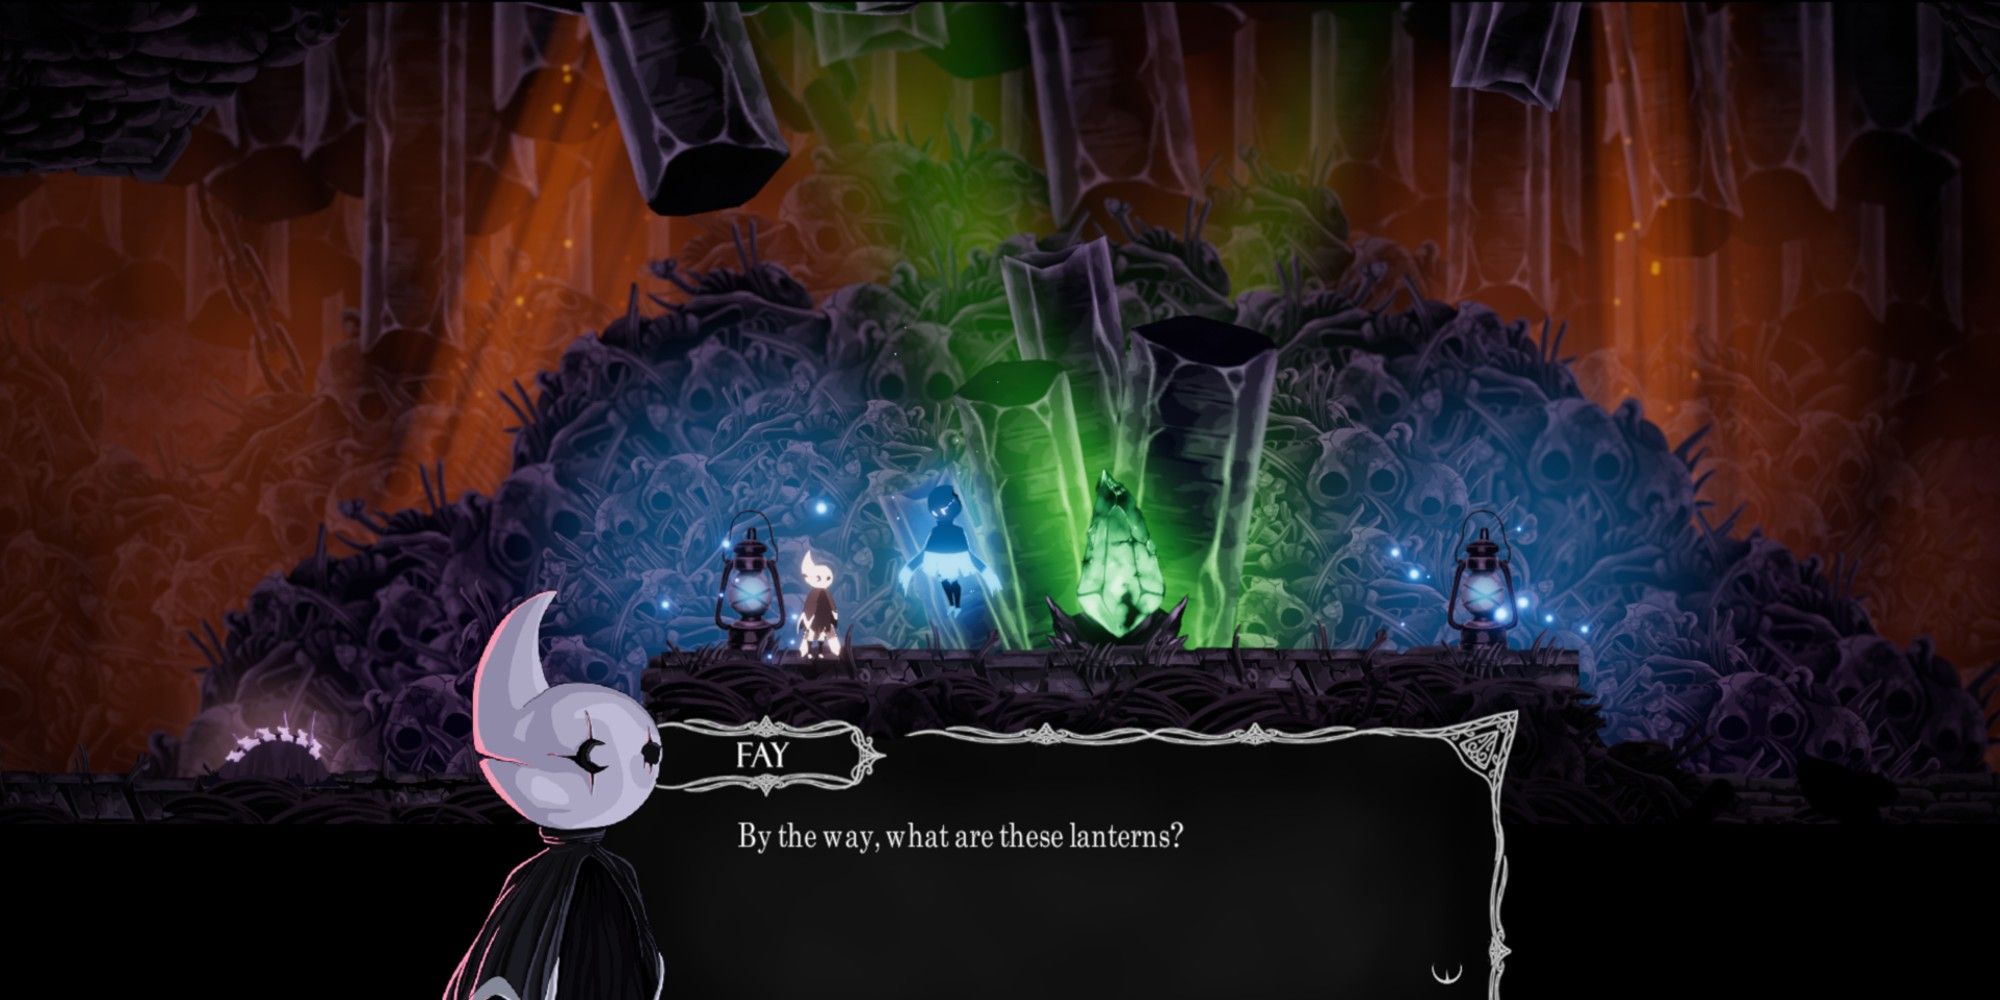 Elypse Fay text box in a dark room with colorful lights emanating from crystals